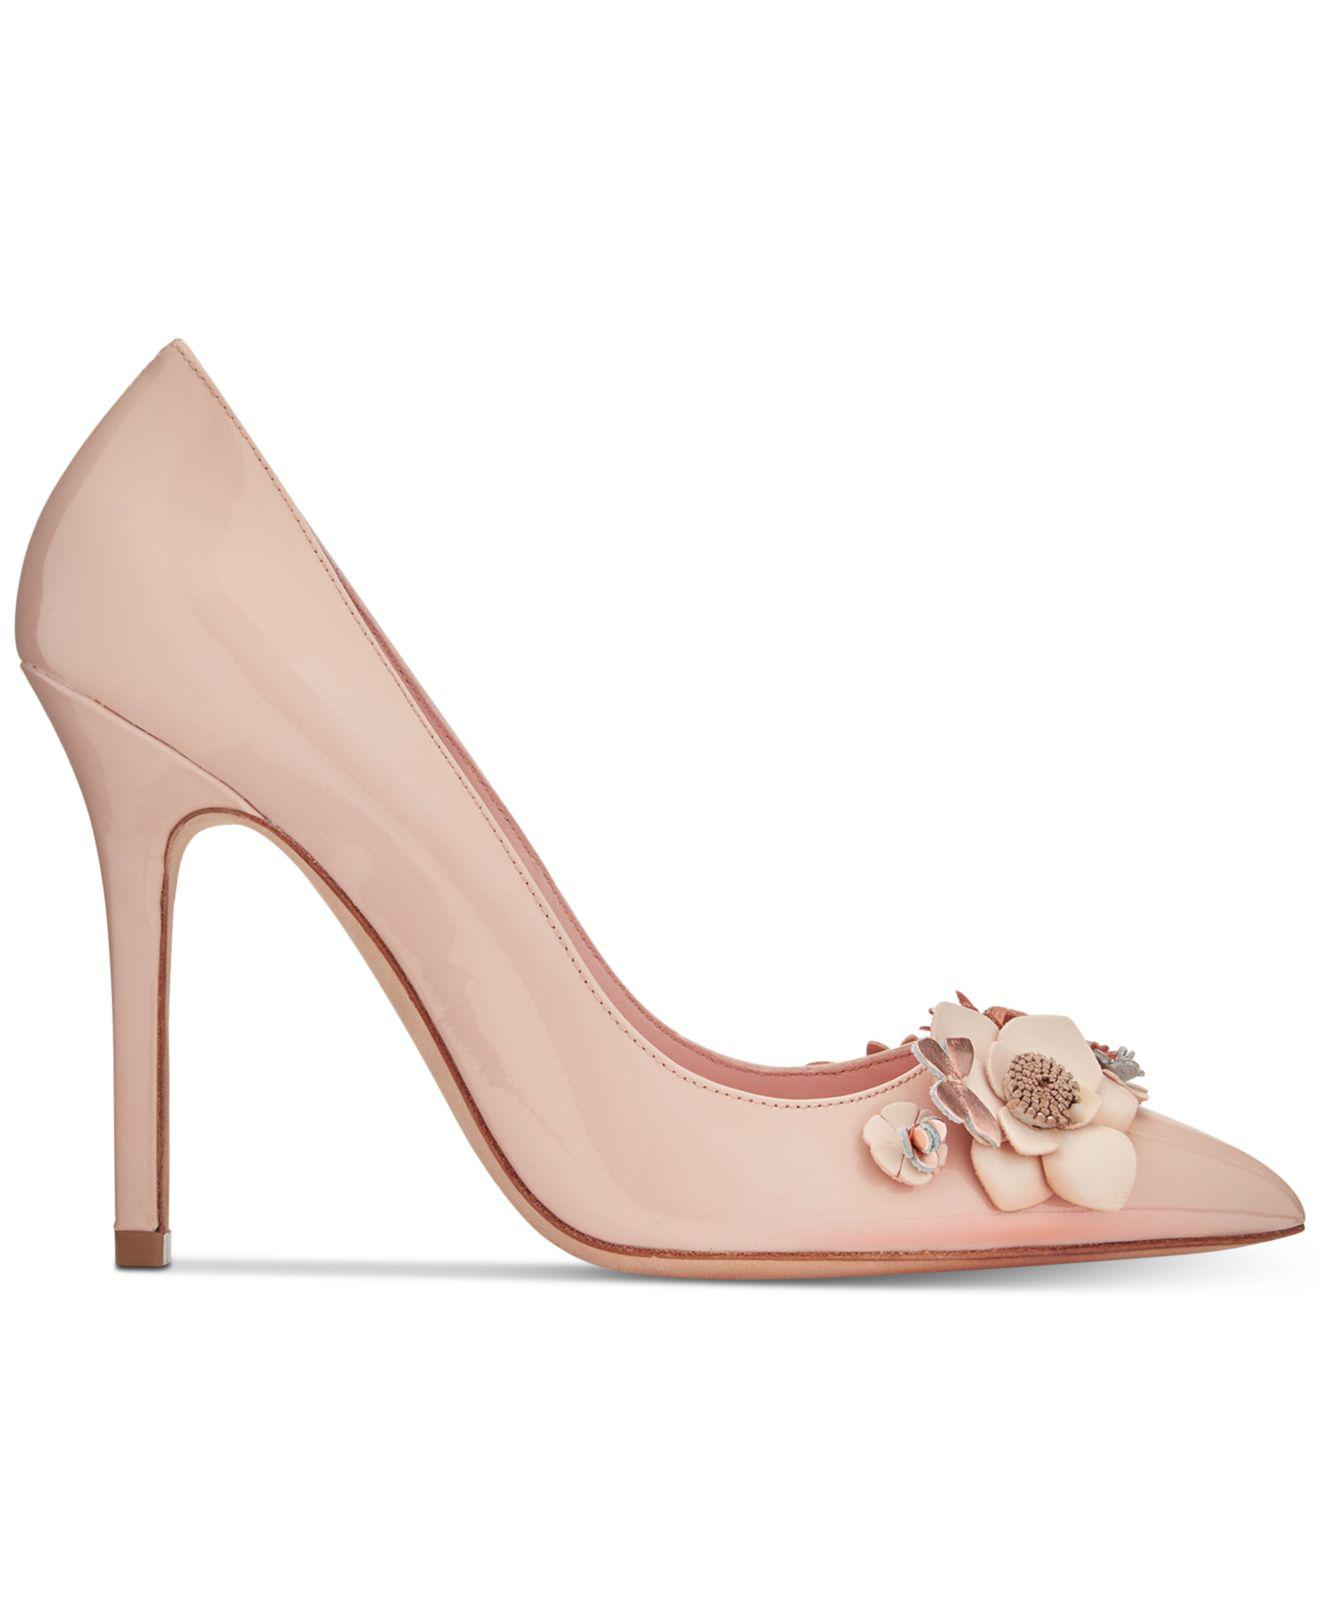 Kate Spade Leather Evelyn Embellished Pointed Toe Pumps in Pale Pink ...